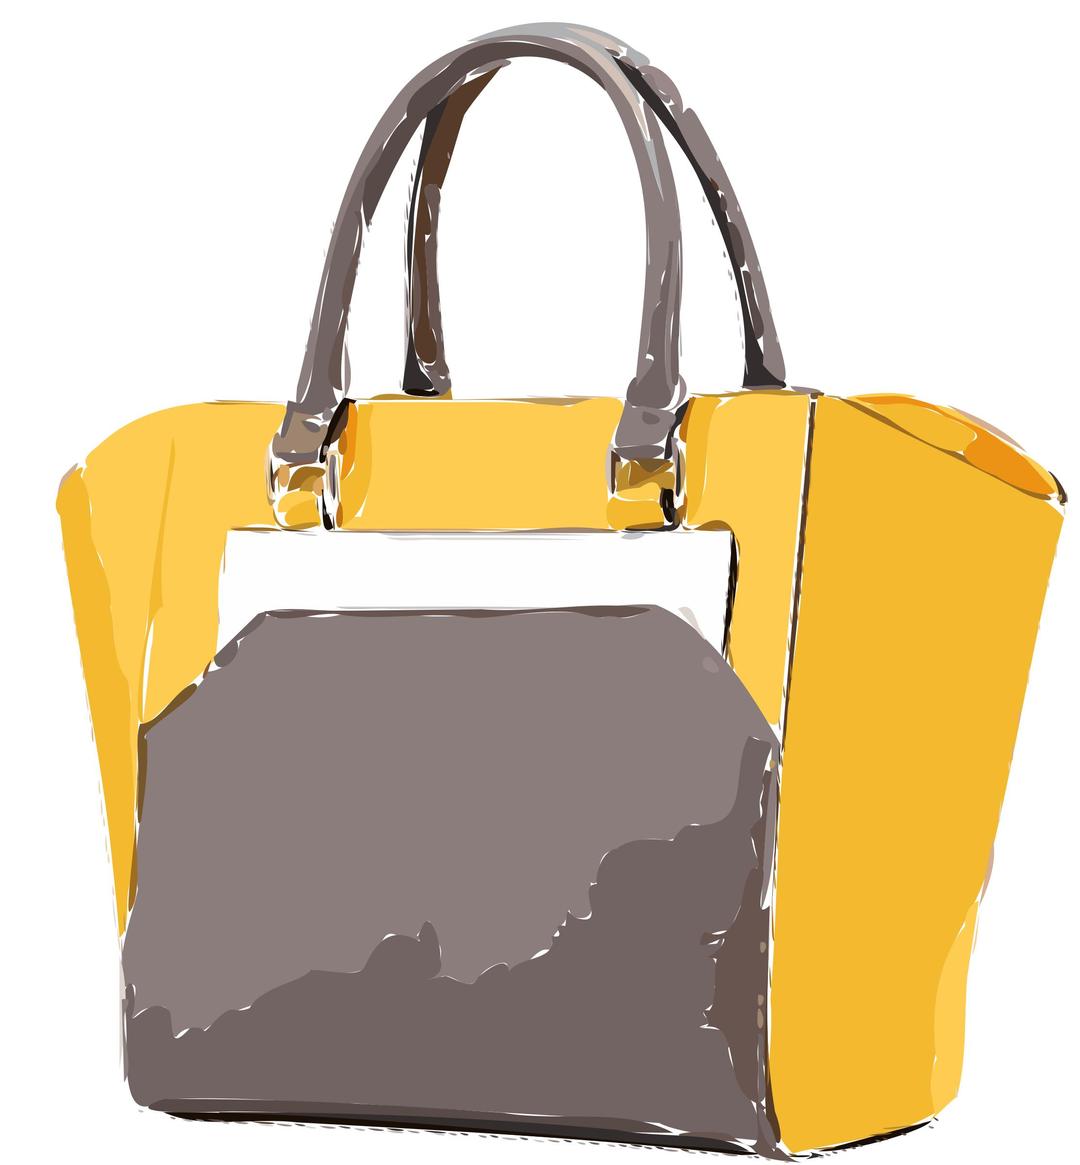 Yellow Tan Leather Leather Bag png transparent